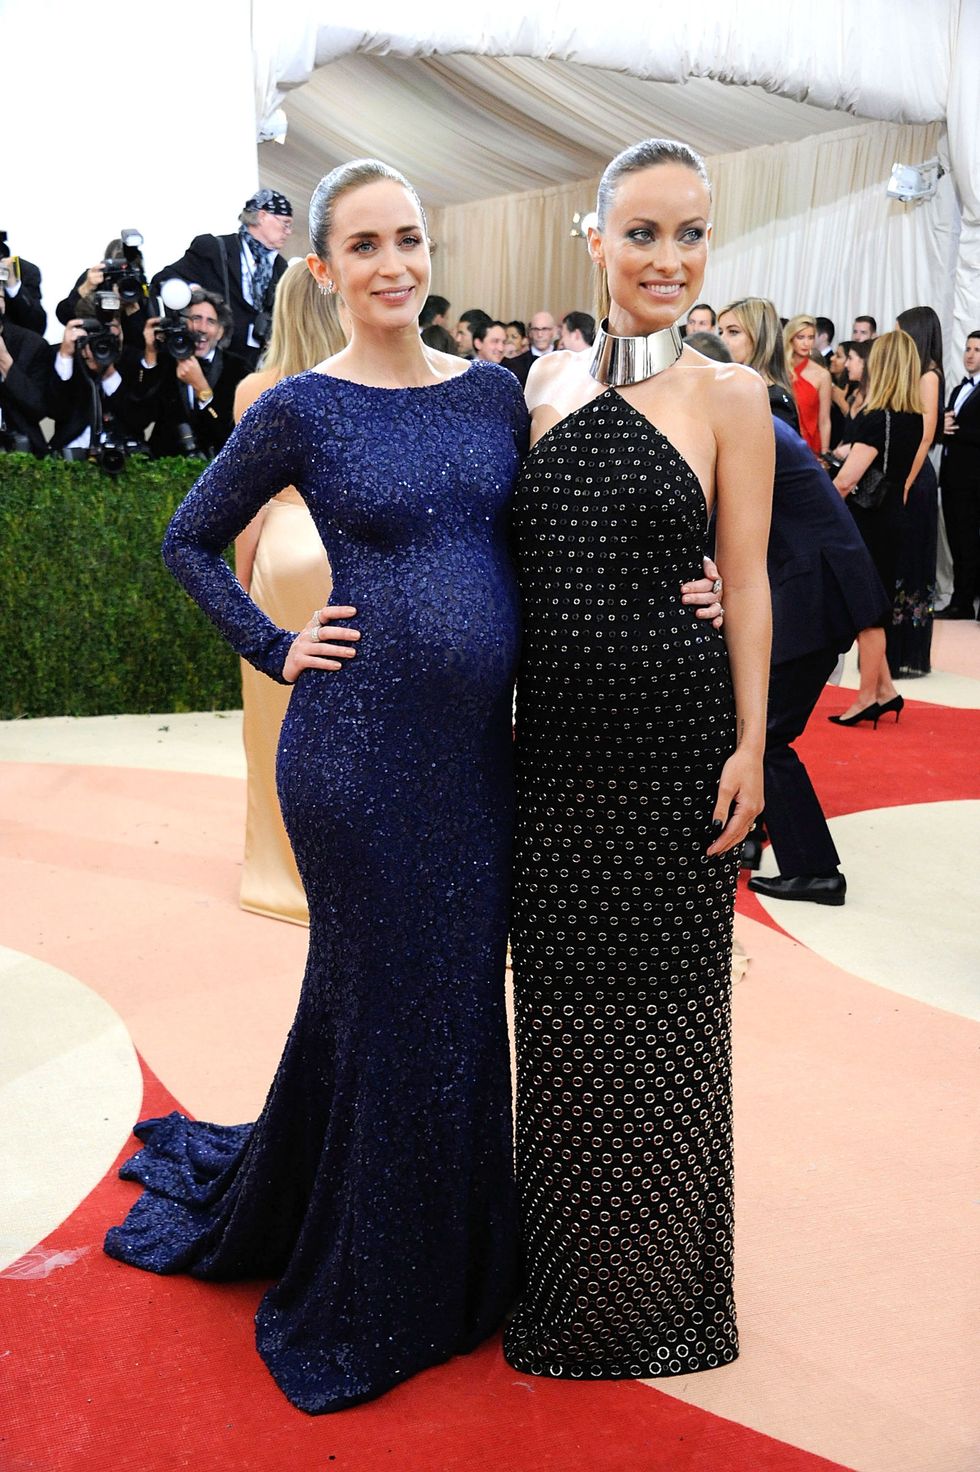 <p>This photo! Wouldn't even have been possible decades ago because pregnancy = you've got to go into hiding! Here, we've got two glowing women&nbsp;in coordinating Michael Kors dresses, one of whom is having so much fun playing with fashion, including cutouts (on an expectant mother—shocking!). &nbsp;</p>